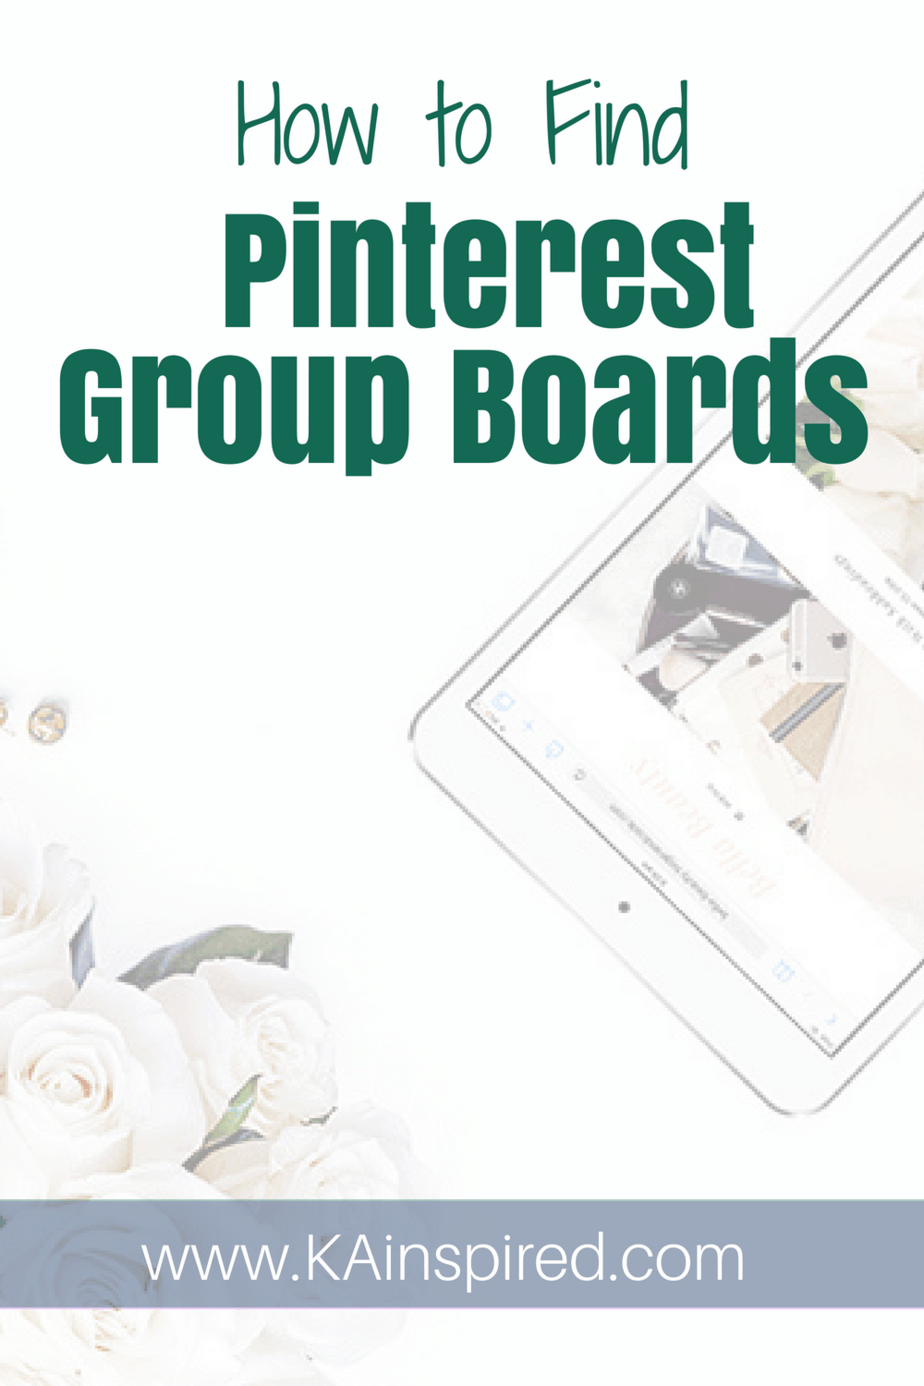 PINTEREST GROUP BOARDS! how to find group boards! Want to know how to make money by pinning on Pinterest? Head over to my blog, www.kainspired.com and I'll teach you how you can earn money from pinning on Pinterest. #sidehustle #makemoney #pinning #pinterest #makemoneyonline #KAinspired #pinterestgroupboards #boards #groupboards